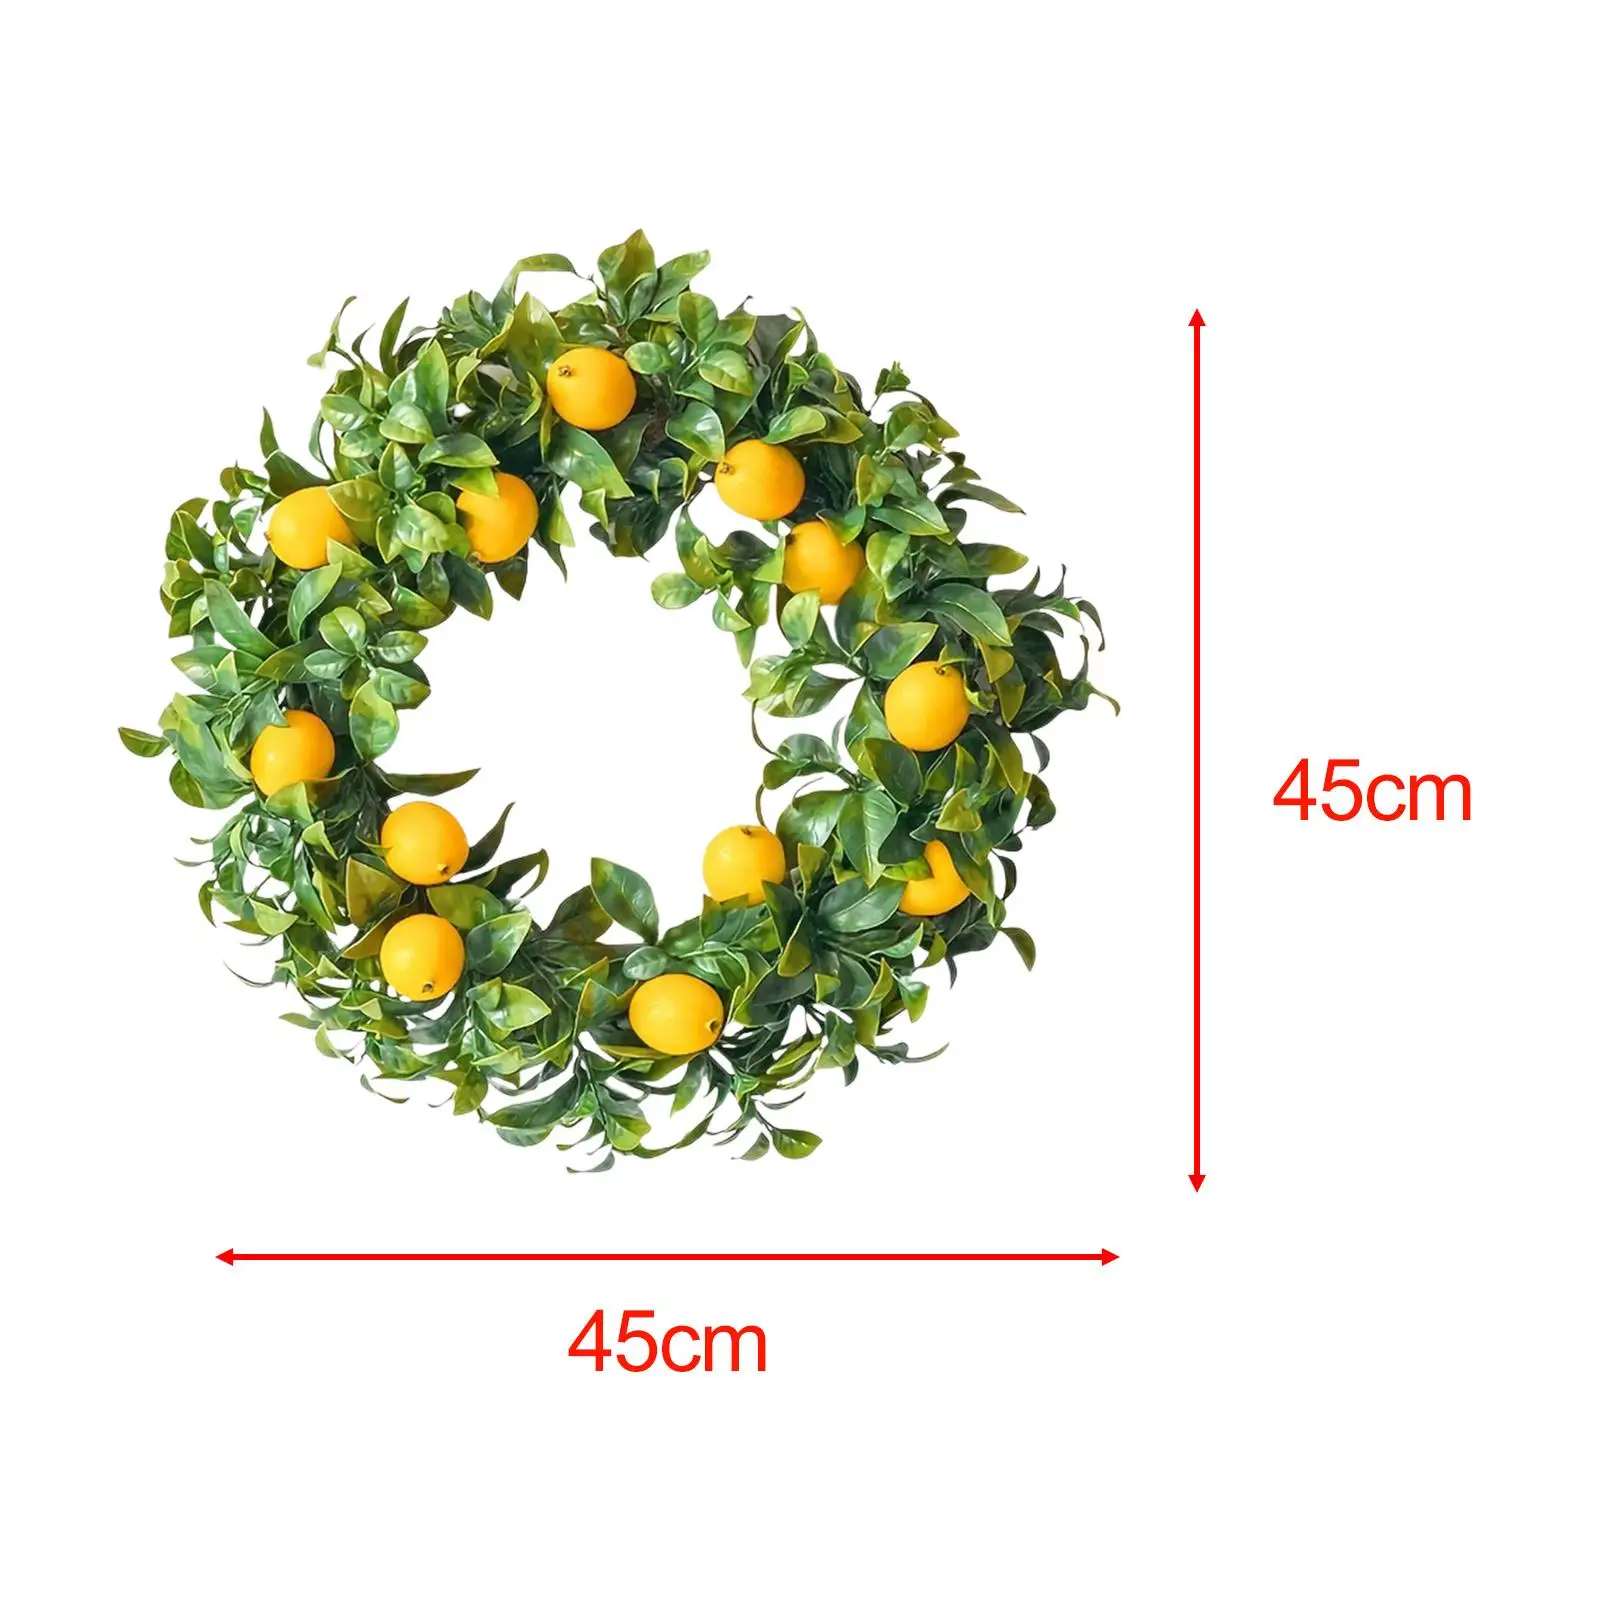  Artificial Wreath Realistic Round 45cm Wall Hanging Ornament Spring Wreath Garland for Fence Window Celebration Wall Porch